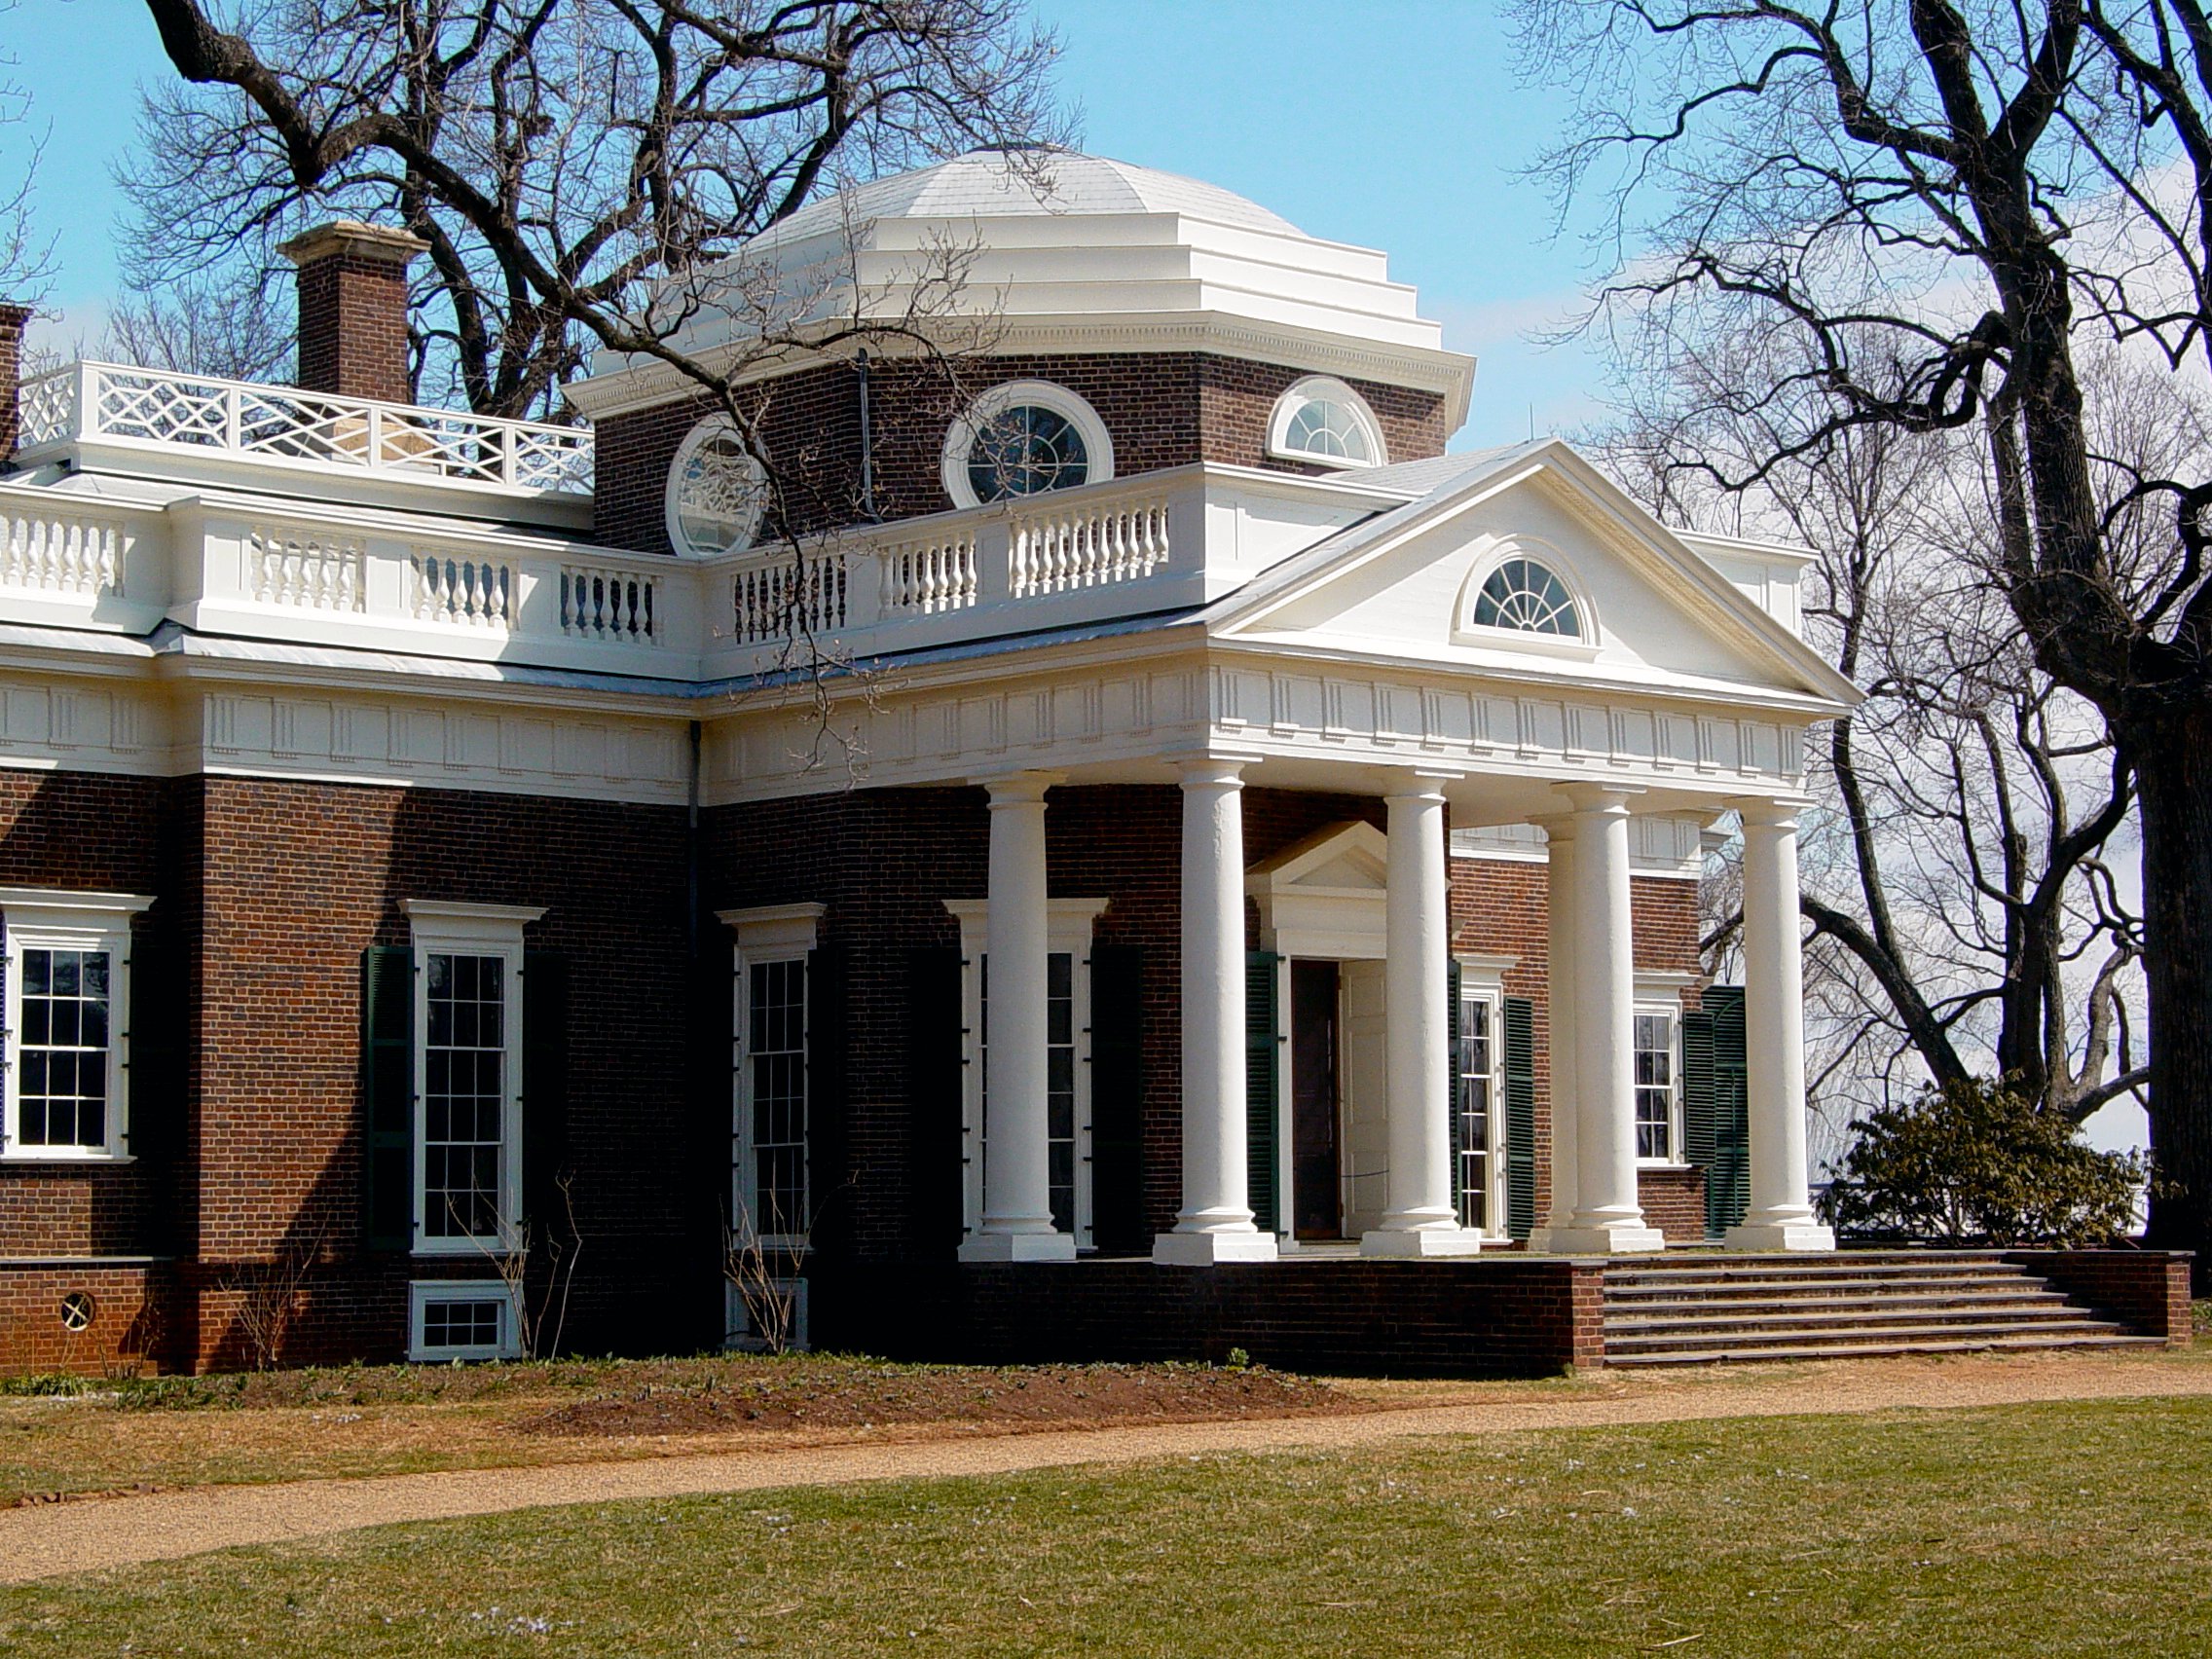 At Monticello, photography is not permitted inside the house